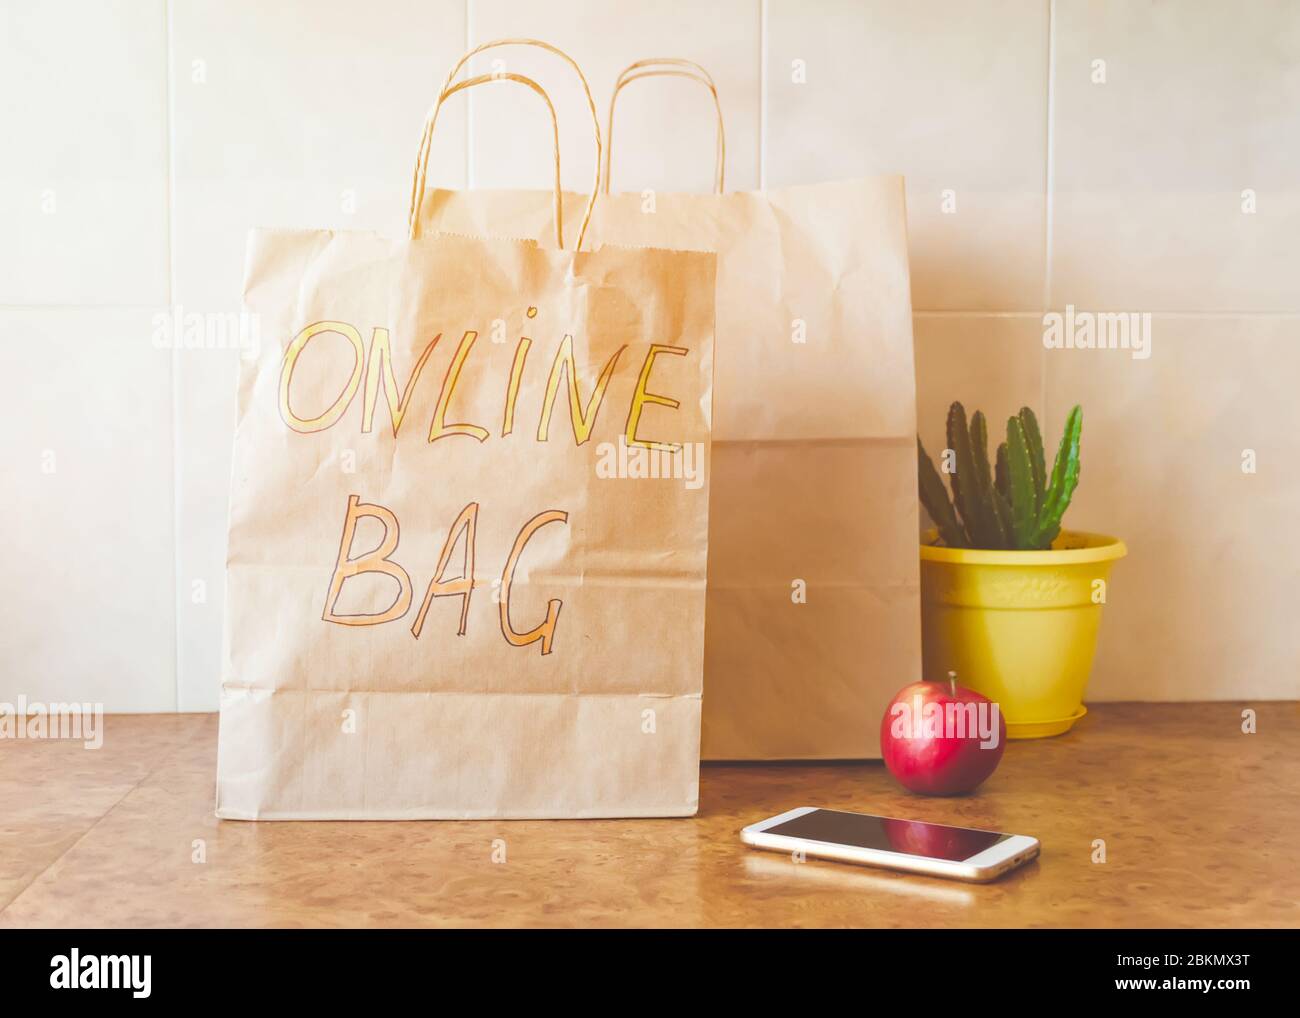 Paper bag with inscription - Online bag, fresh red apple, mobile phone and a houseplant in a yellow pot on a kitchen table. Online shopping and contac Stock Photo